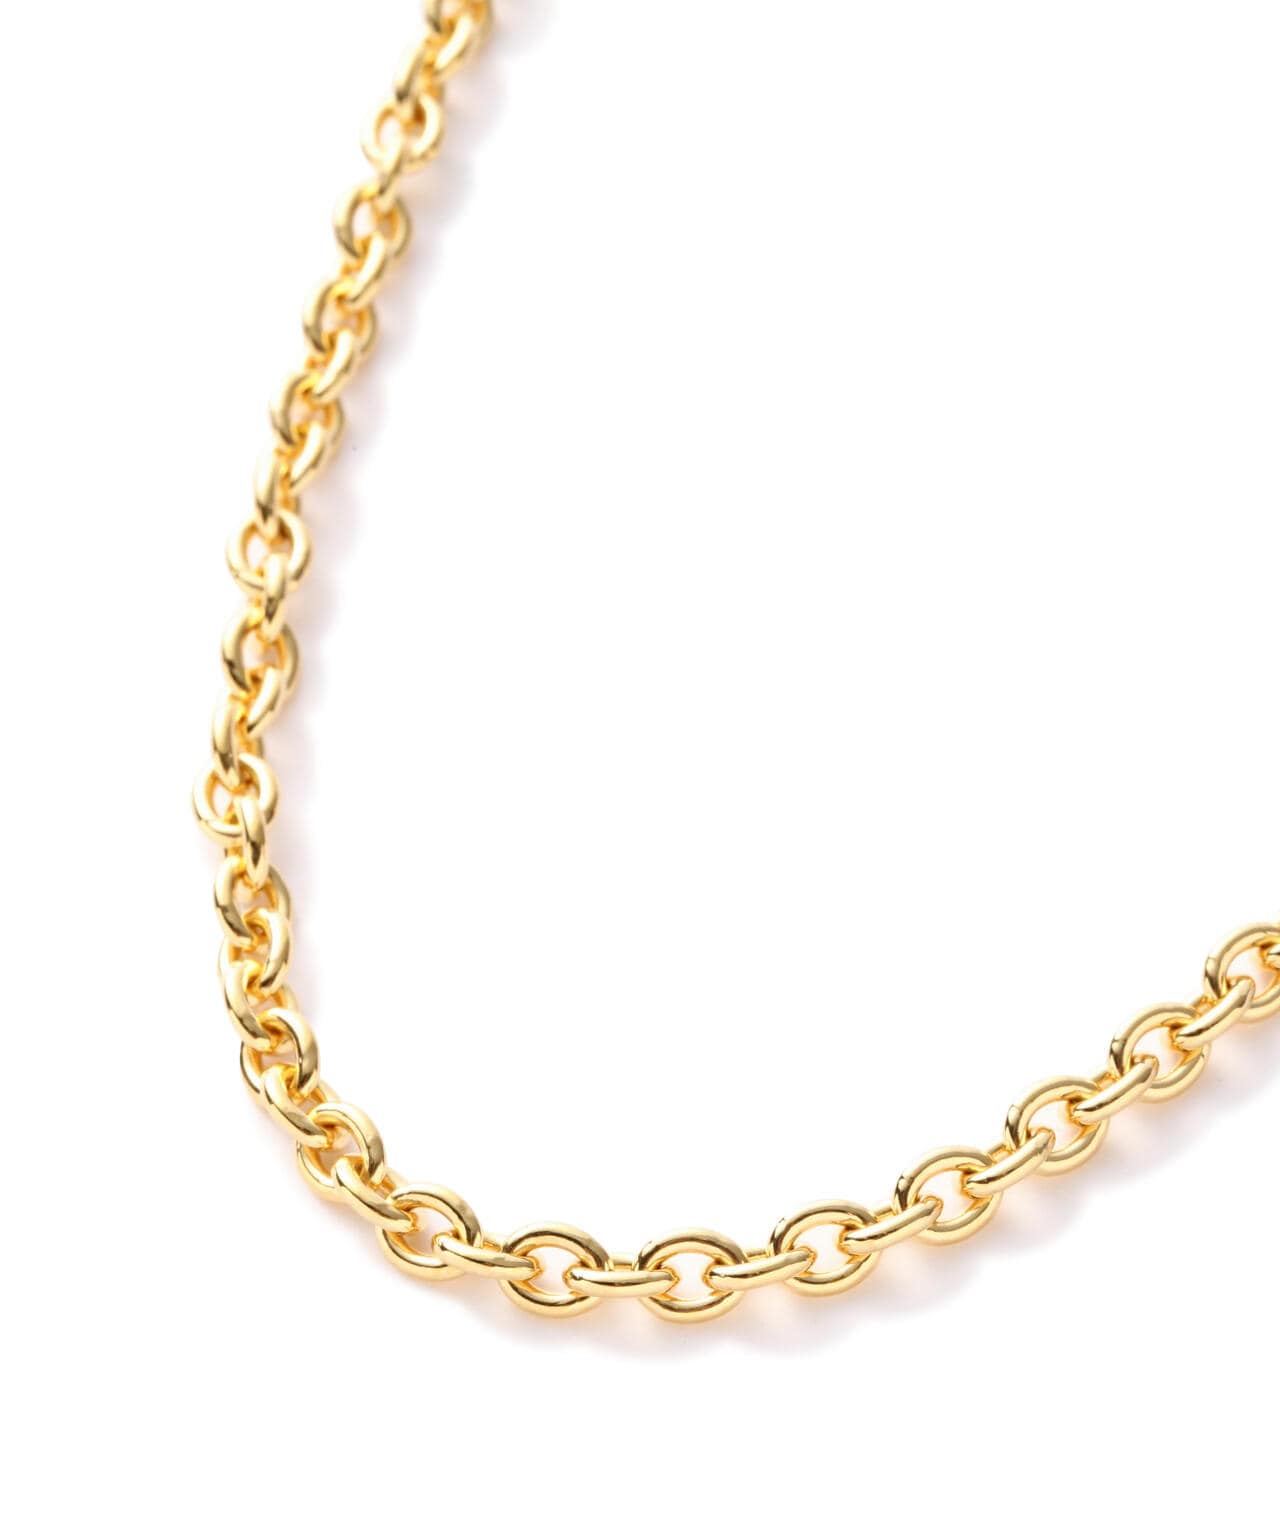 TOM WOOD ada chain ネックレス　エイダチェーンネックレス